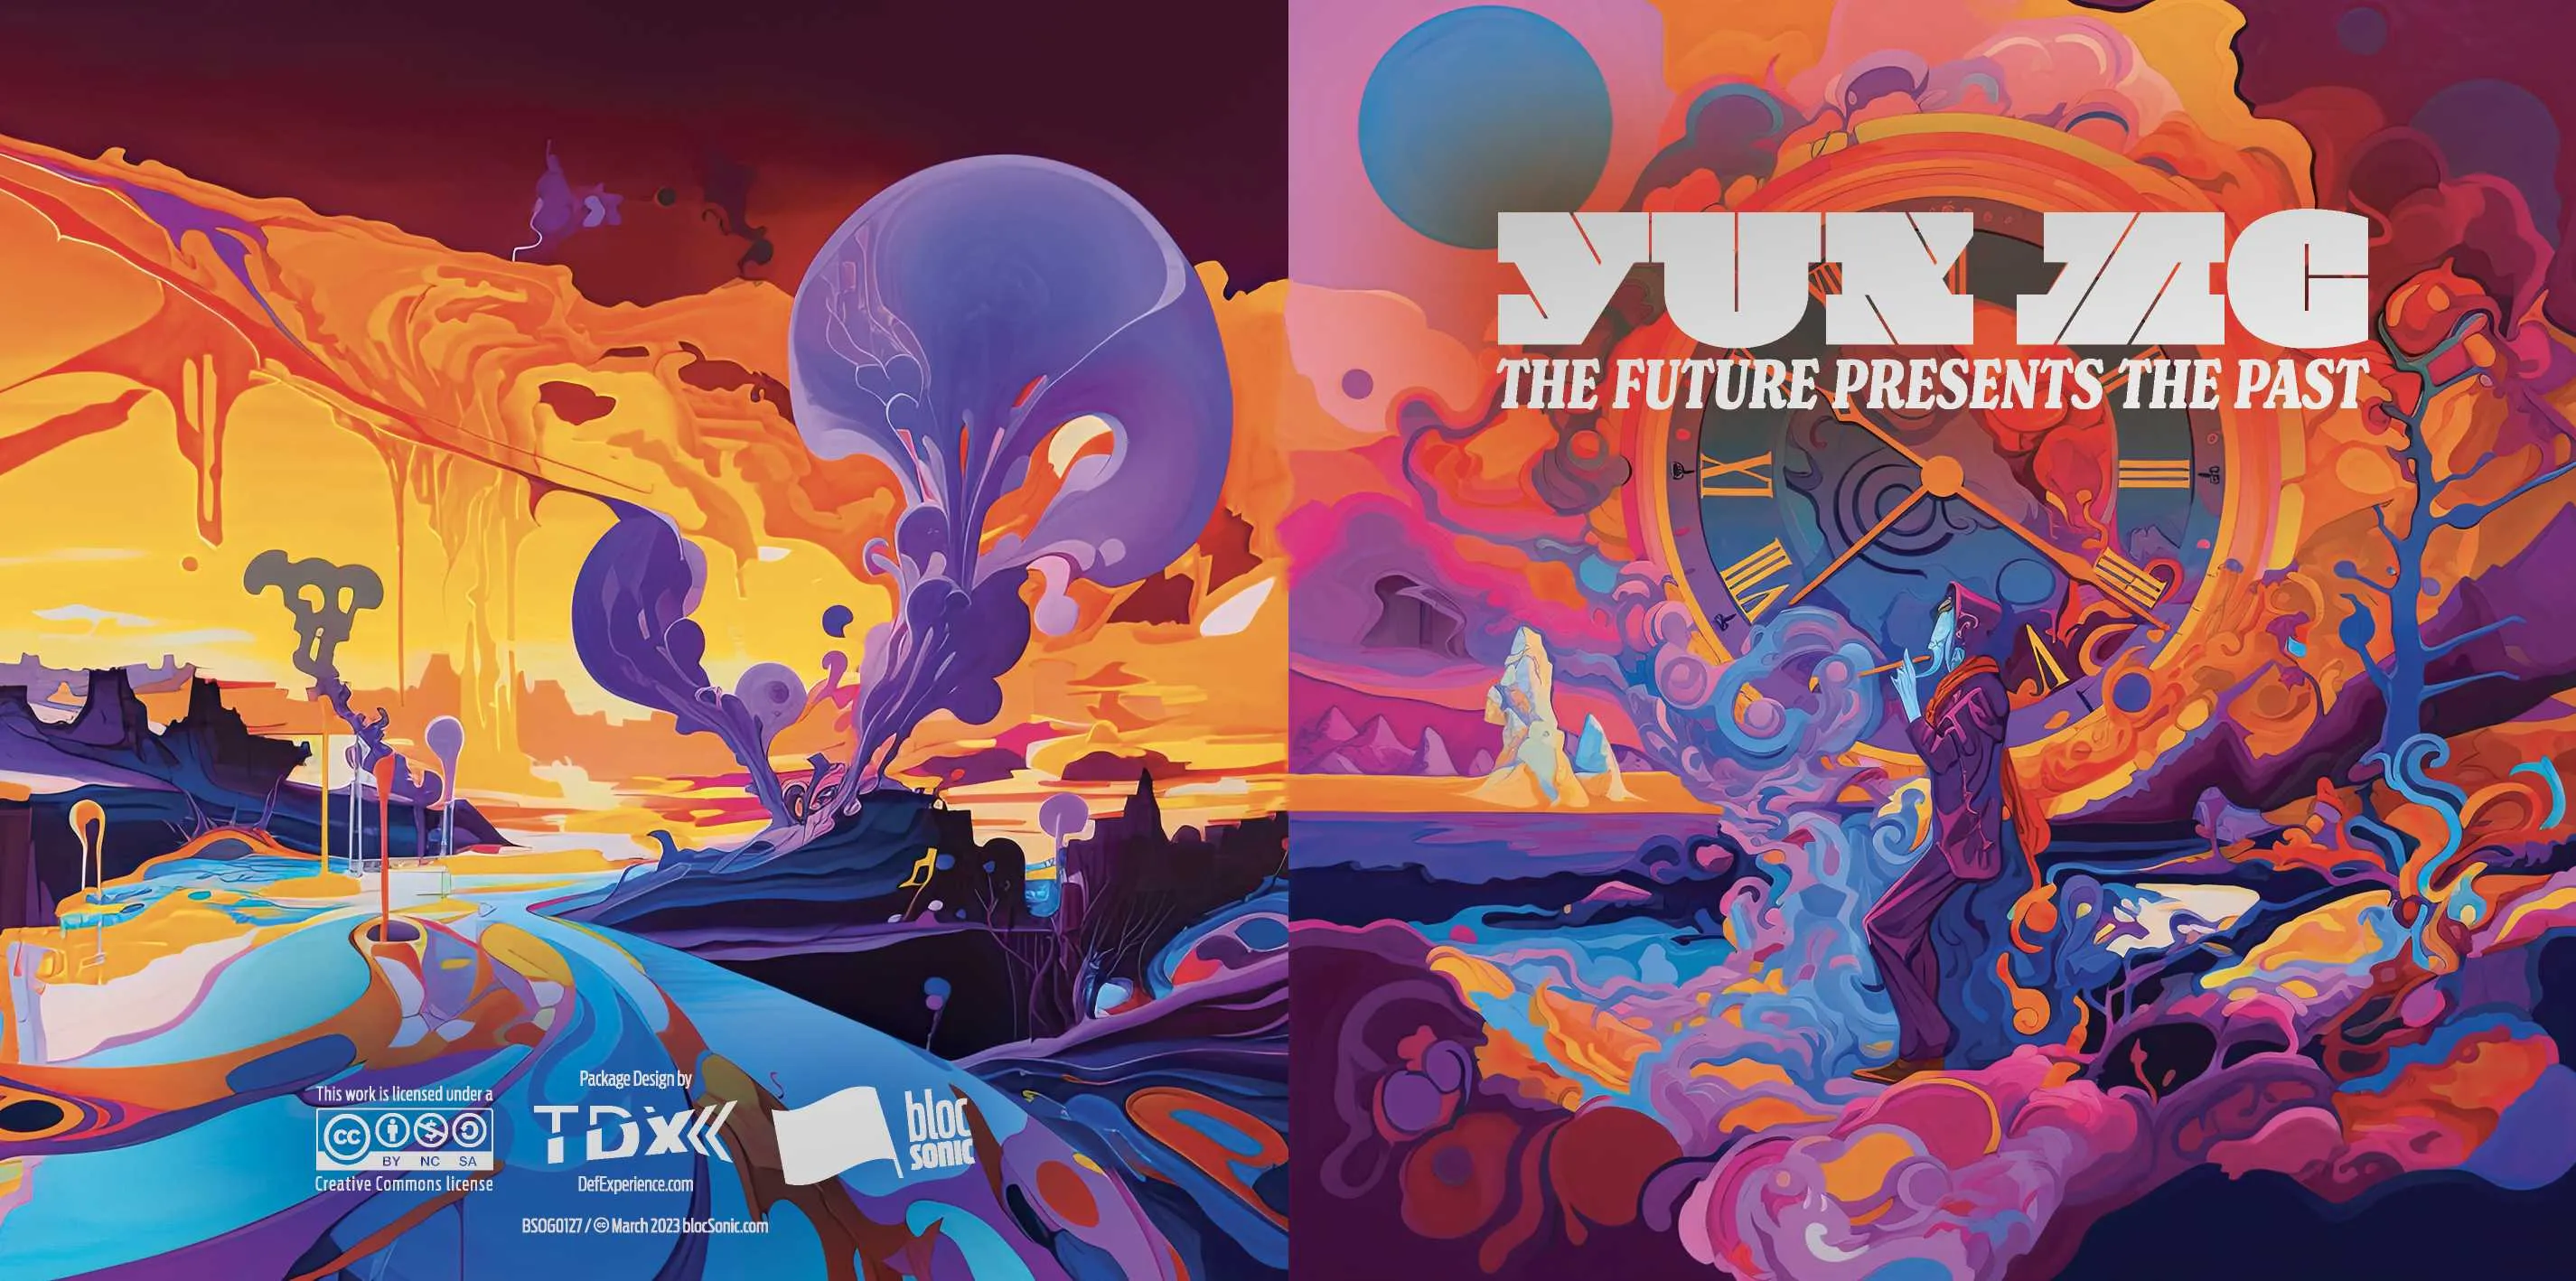 Album insert for “The Future Presents The Past” by Yuk MC